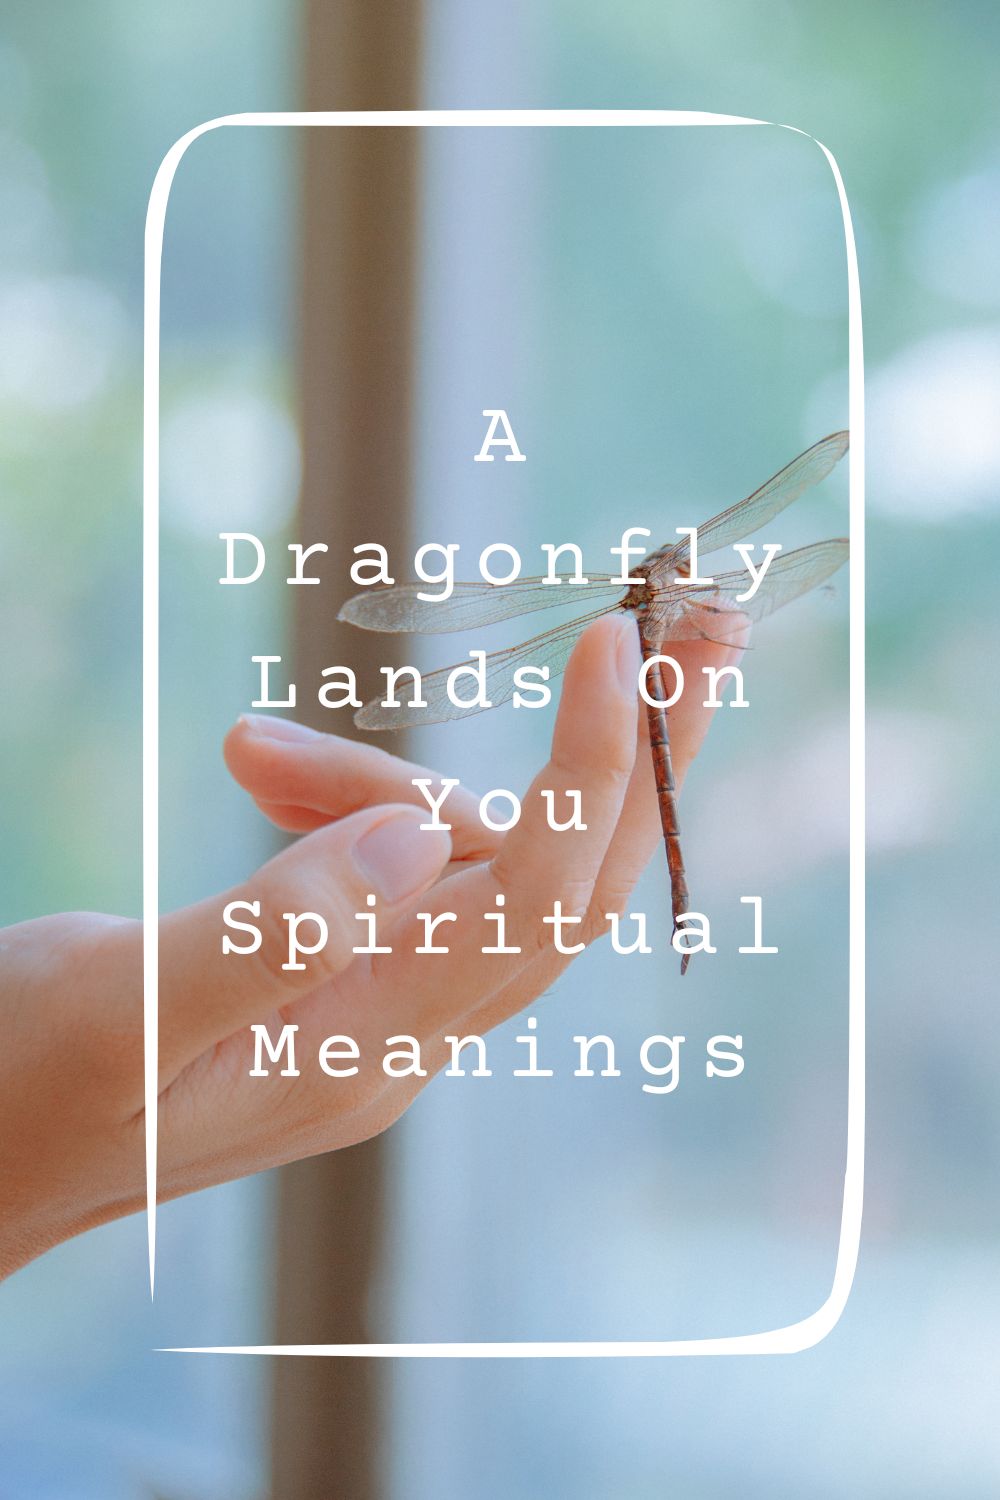 9 A Dragonfly Lands On You Spiritual Meanings1